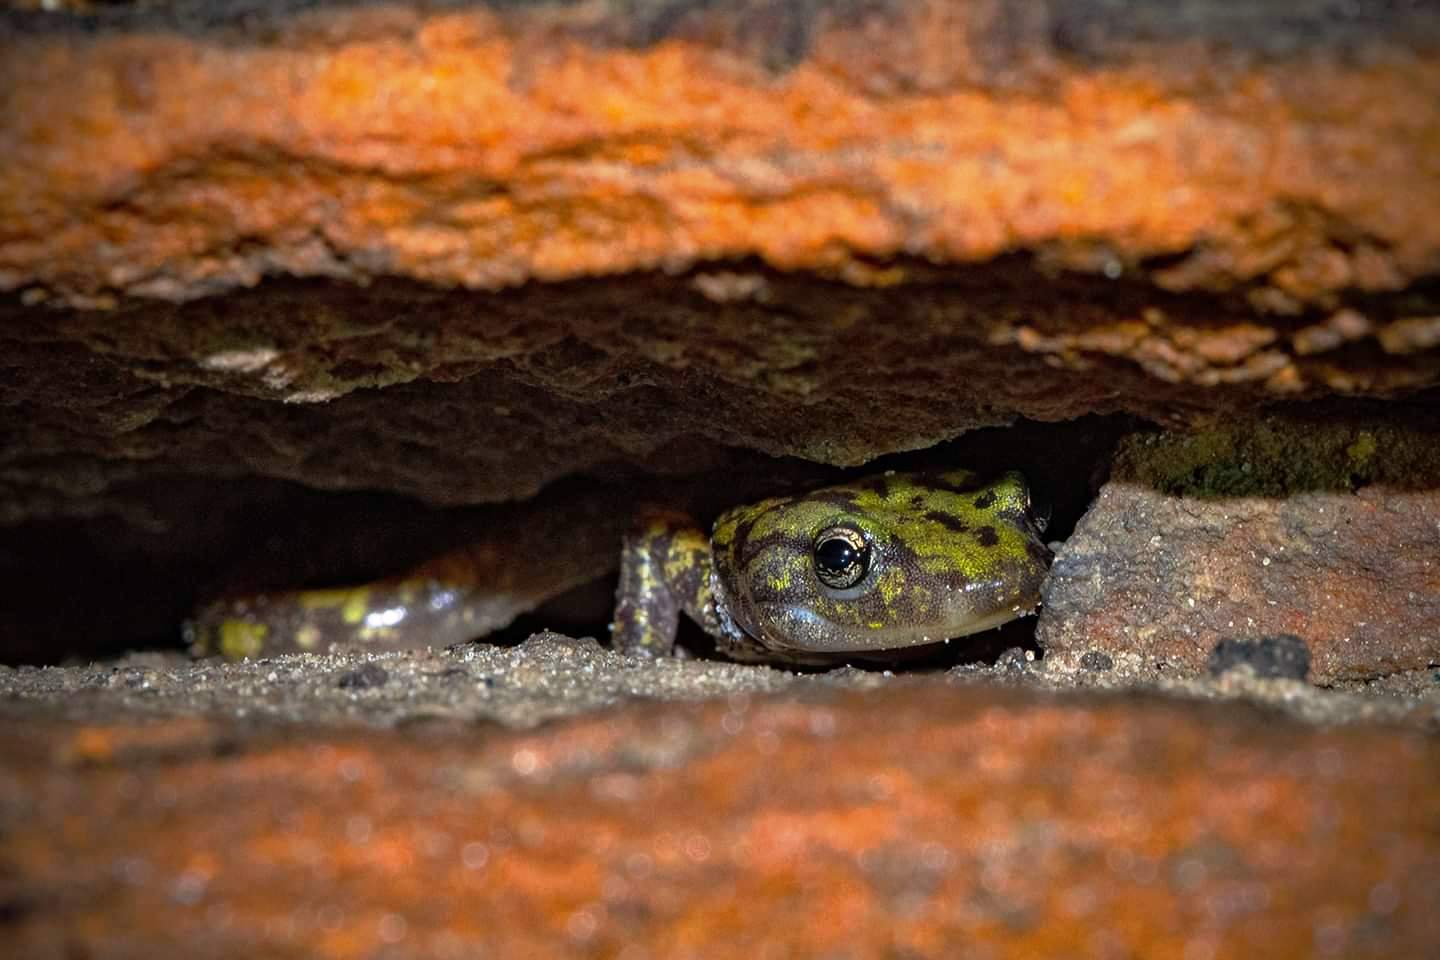 The salamander's face that is bright green with brown speckles peeks out from between two orange rocks.